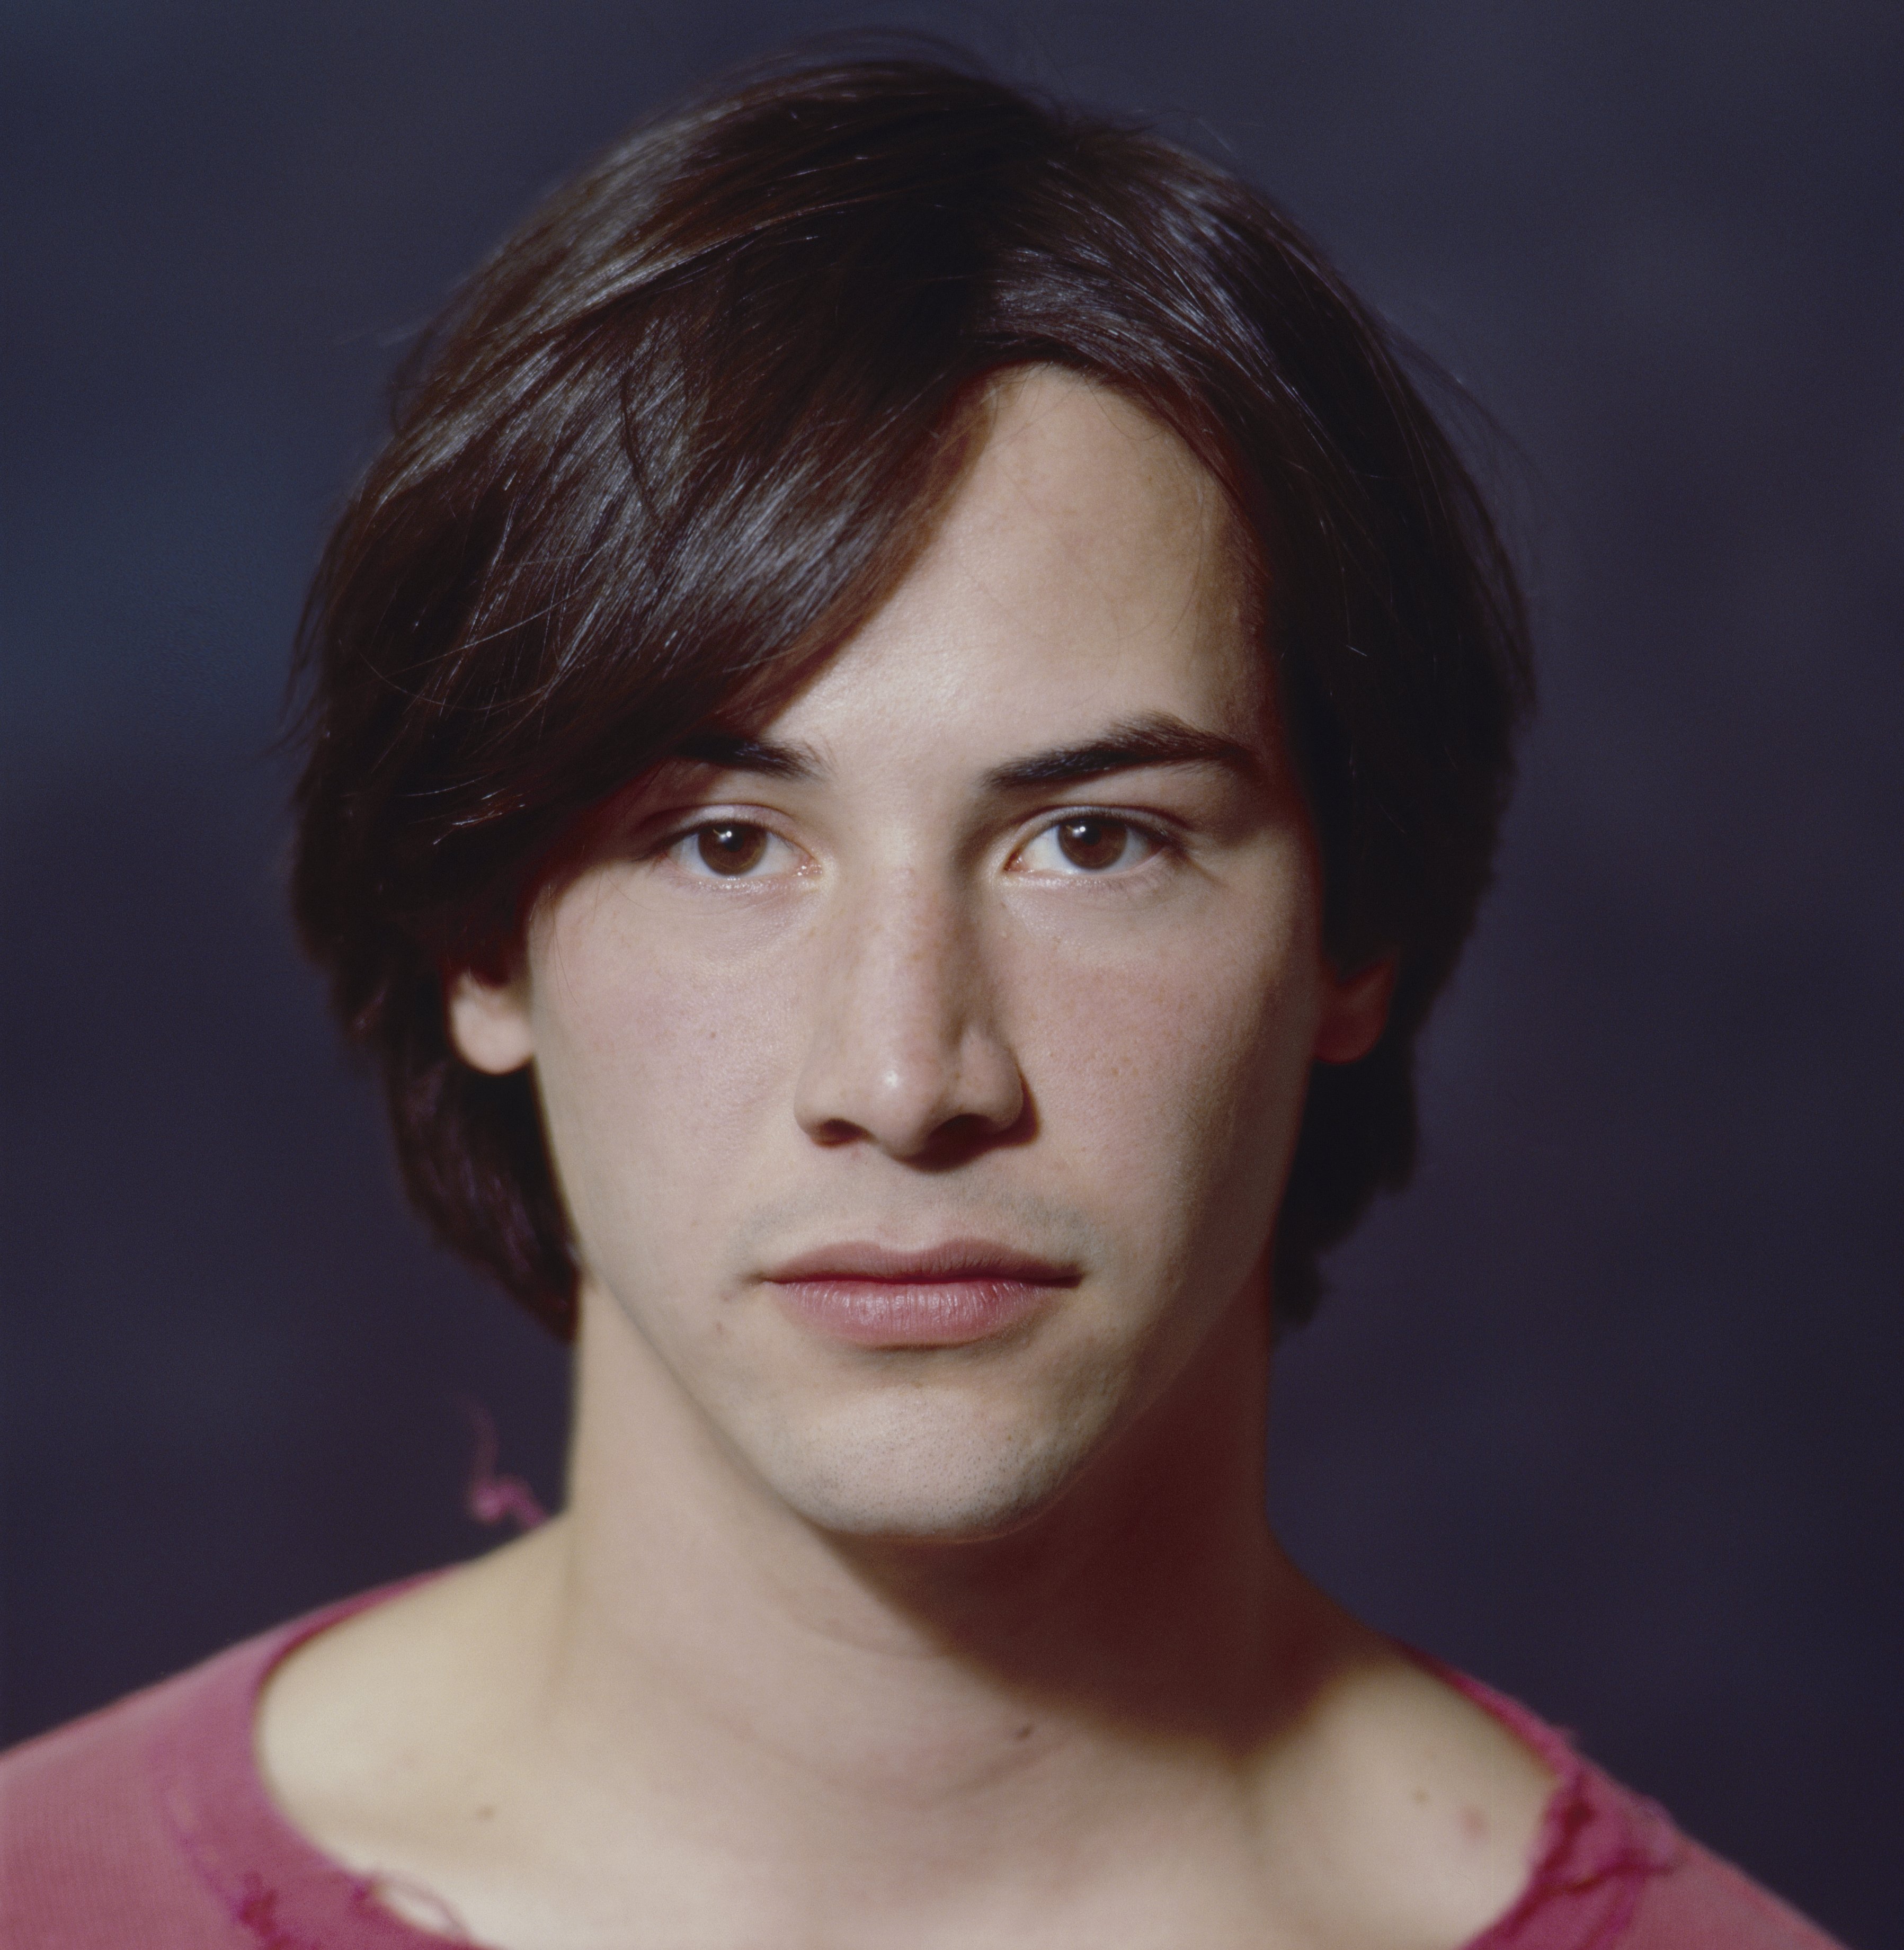 A portrait picture of Keanu Reeves taken in 1986. | Source: Getty Images.